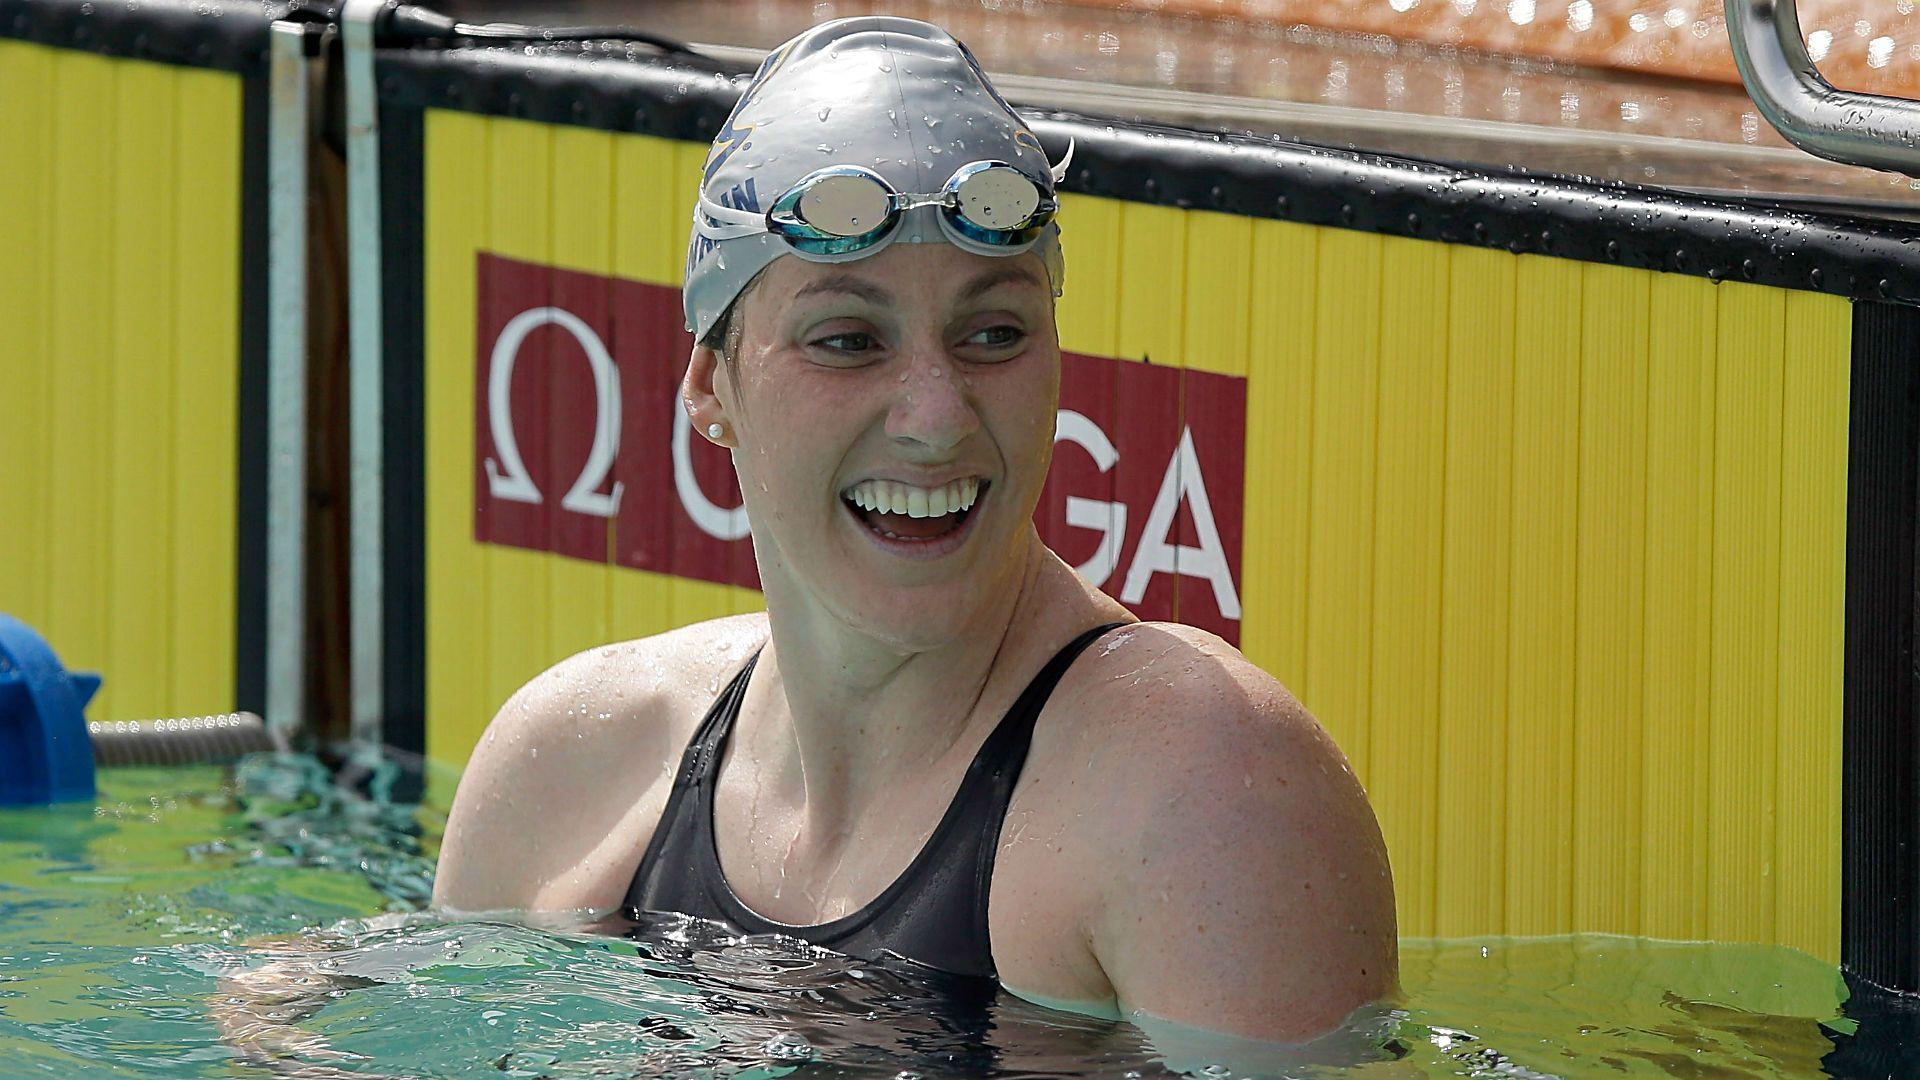 Olympic medalist Missy Franklin announces retirement